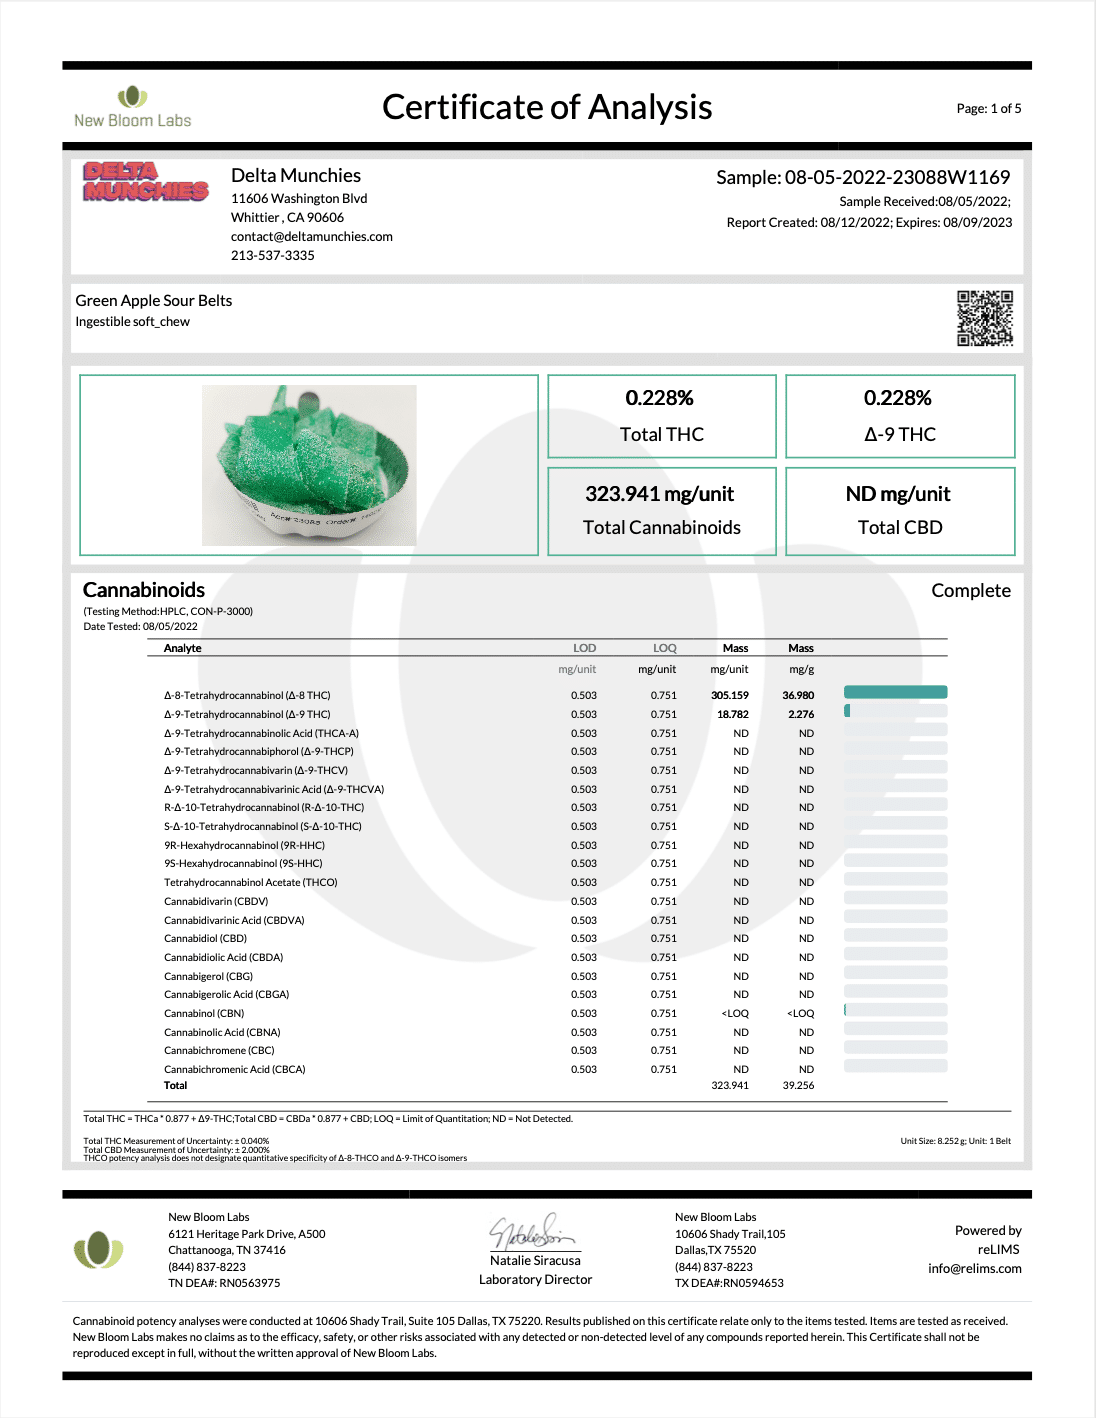 Third party lab test results for delta 8 green apple sour belt gummies conducted in 2023 by an FDA-approved laboratory for cannabinoid testing and certification.